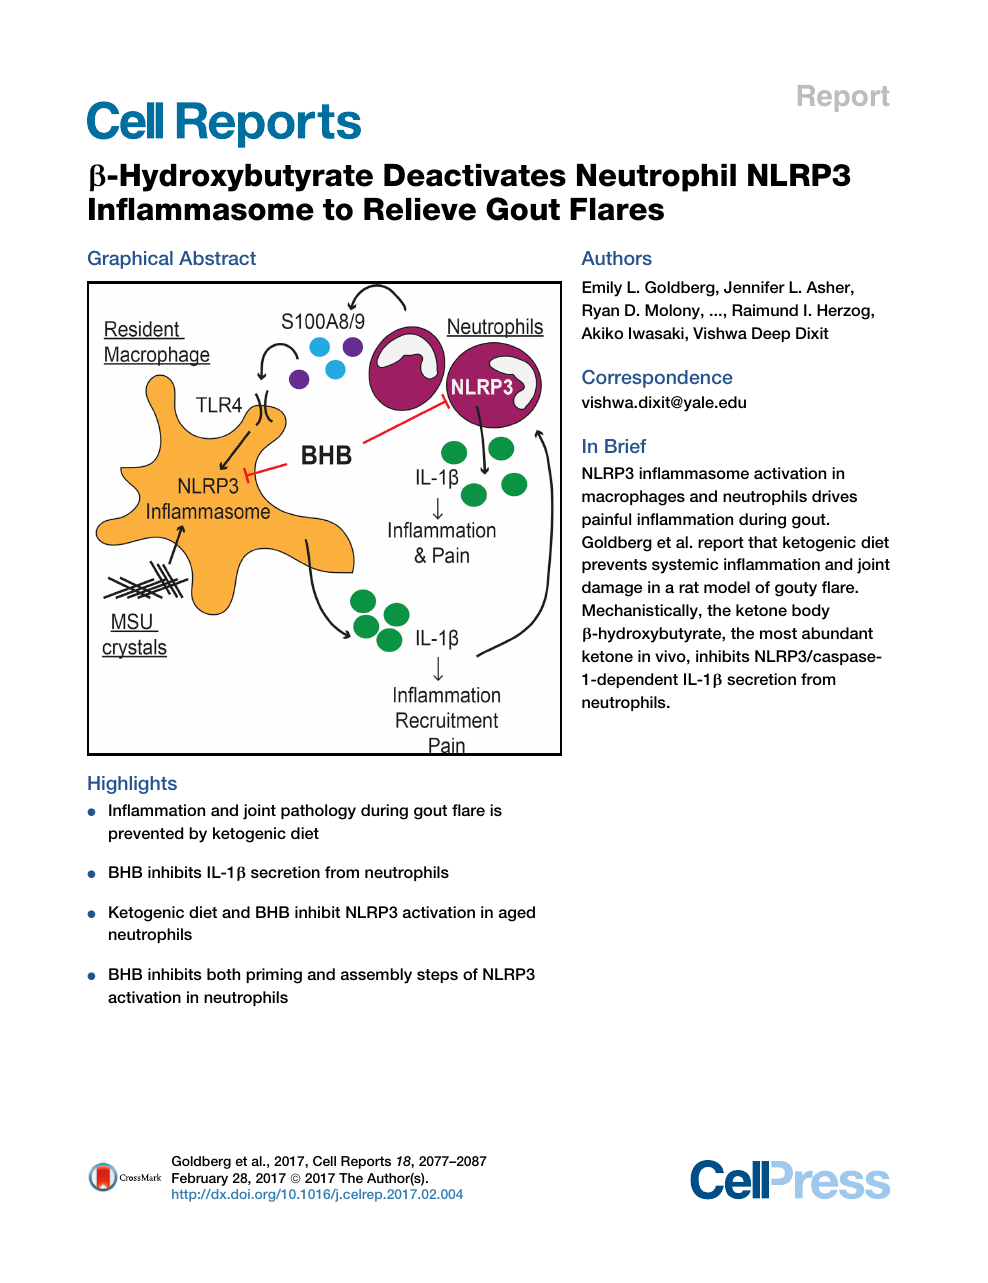 B Hydroxybutyrate Deactivates Neutrophil Nlrp3 Inflammasome To Relieve Gout Flares Topic Of Research Paper In Biological Sciences Download Scholarly Article Pdf And Read For Free On Cyberleninka Open Science Hub